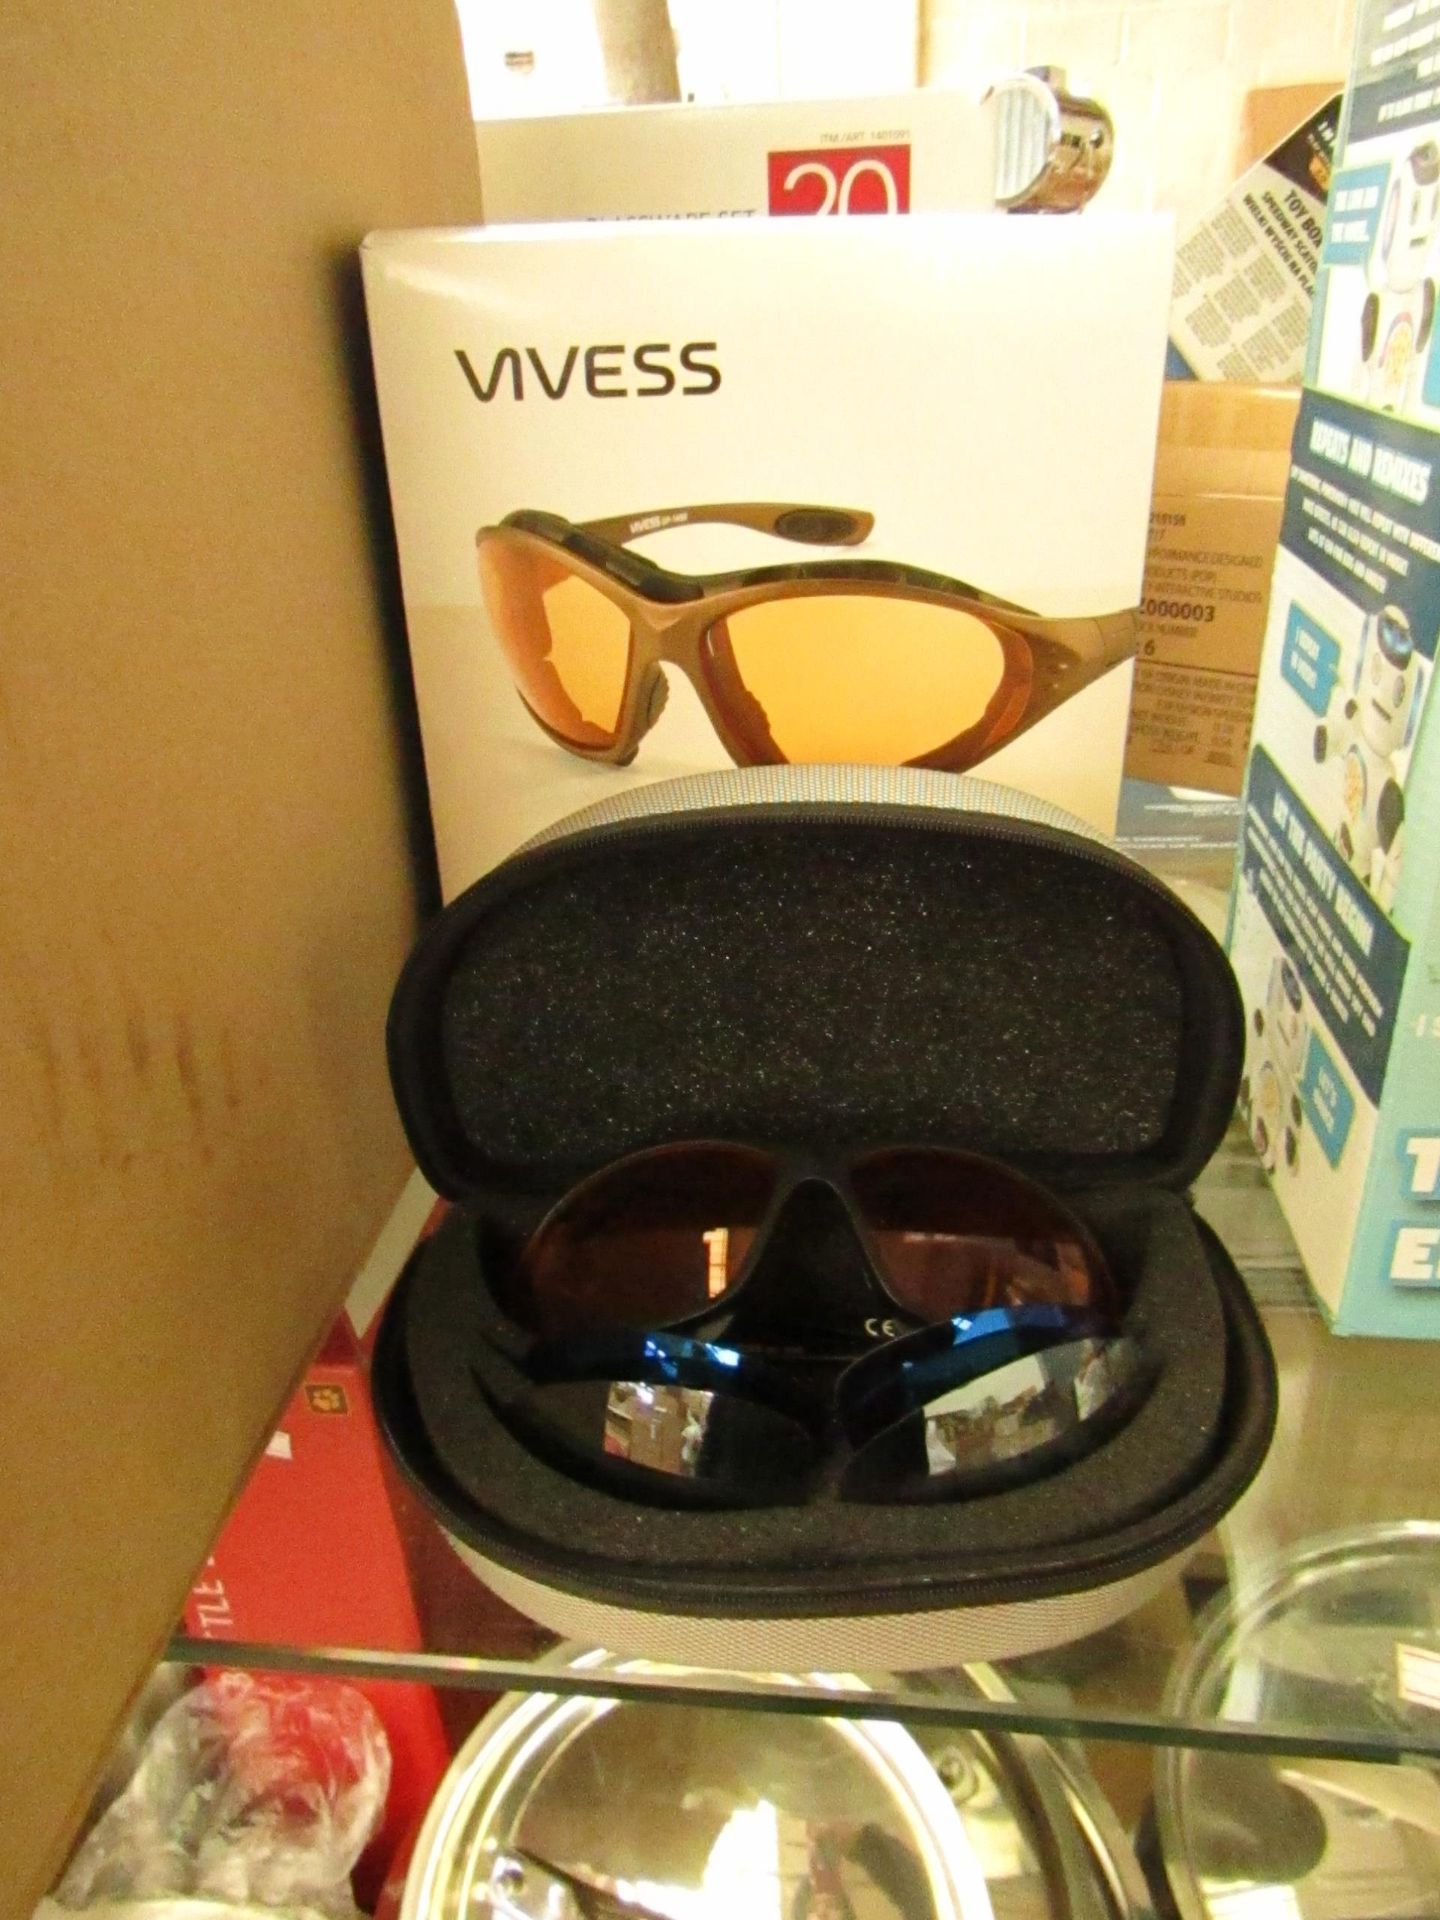 2 x Vivess - Sportbrille Sport Glasses with 2 pairs of Spare Coloured Lens in Carry Case - RRP £14.